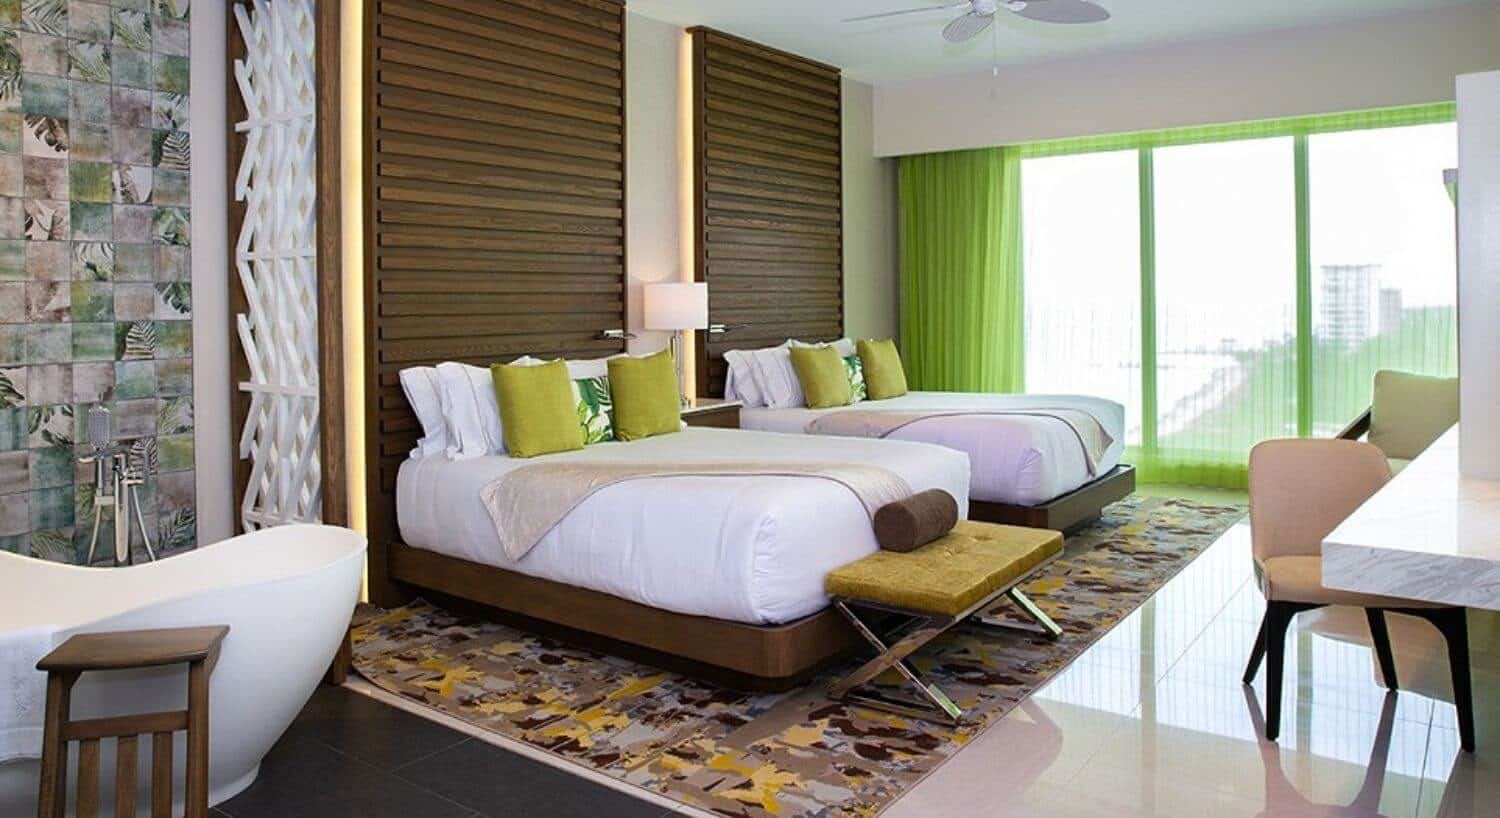 A bedroom with 2 queen beds with white, green and tan bedding, a large soaking tub, a writing desk and chair, and sliding doors out to a private balcony with sheer green curtains.